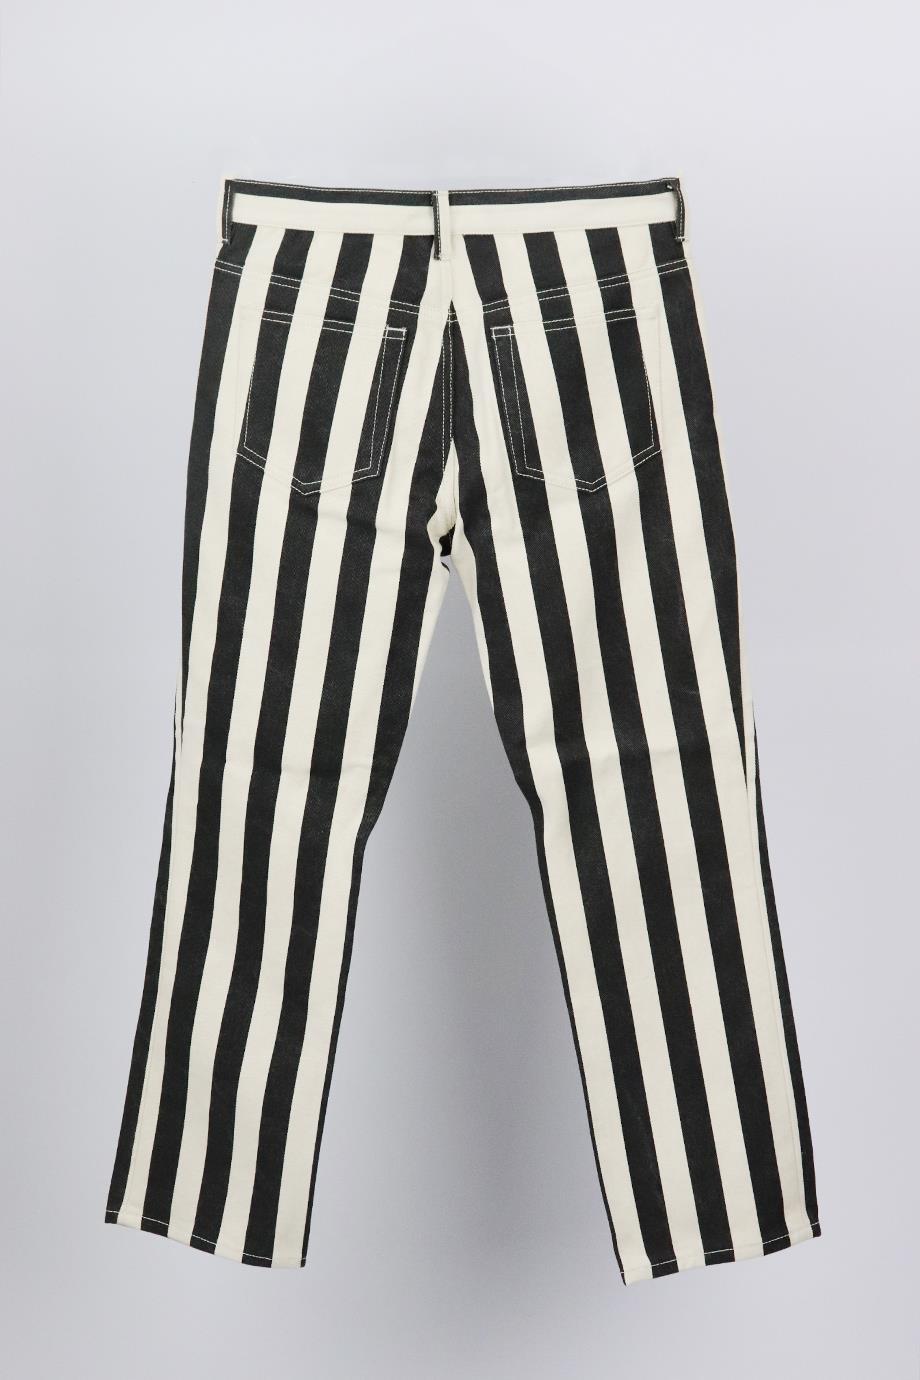 black and white striped fuzzy pants